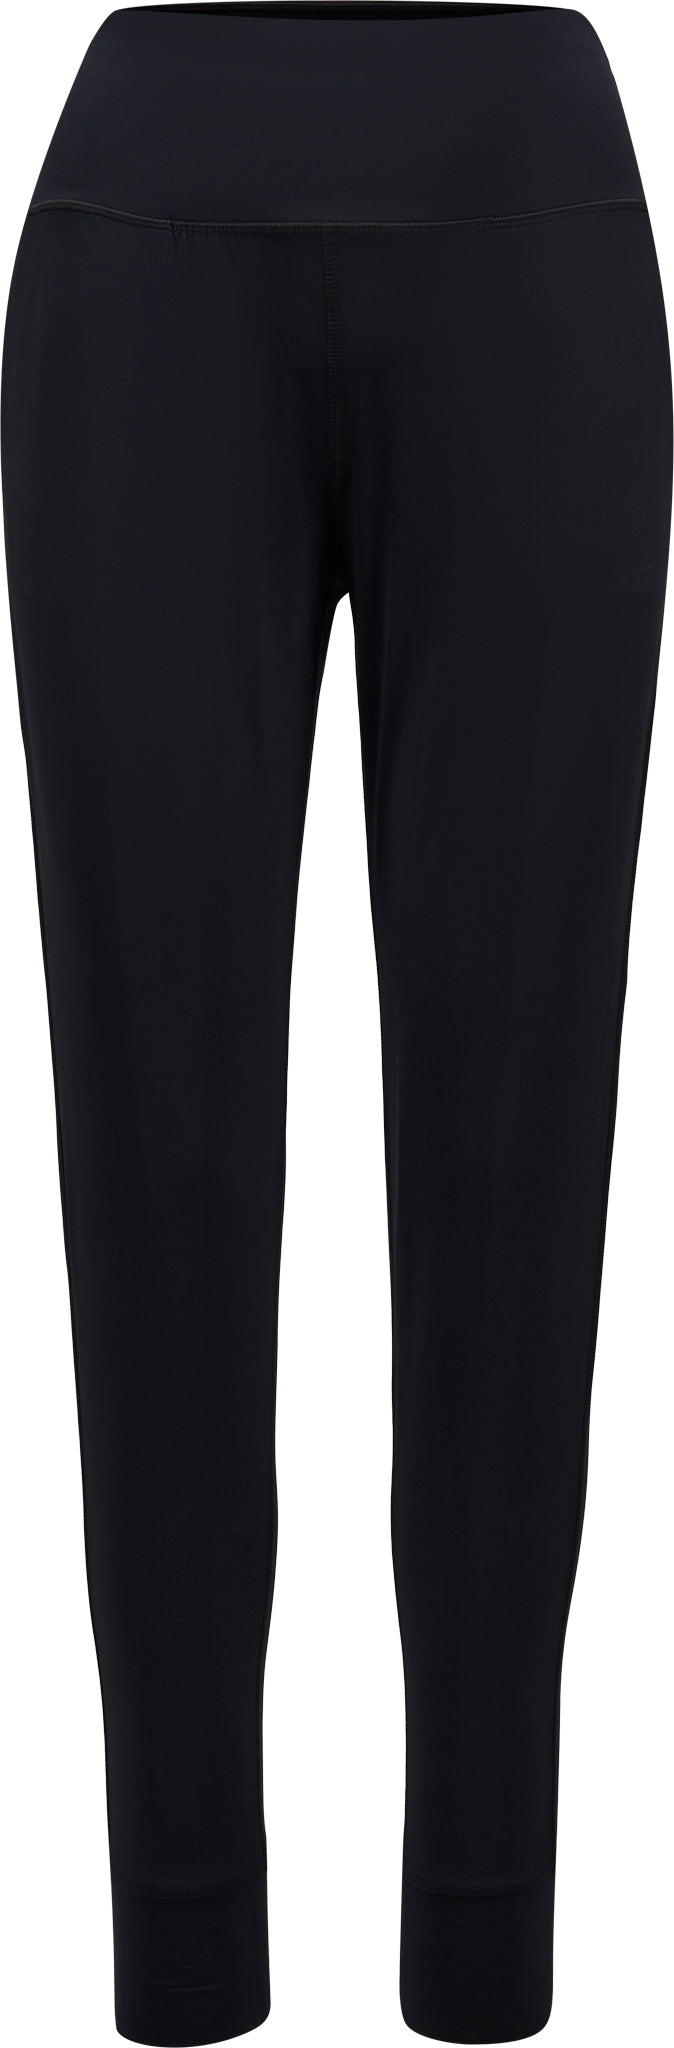 Under Armour Meridian Joggers - Women's